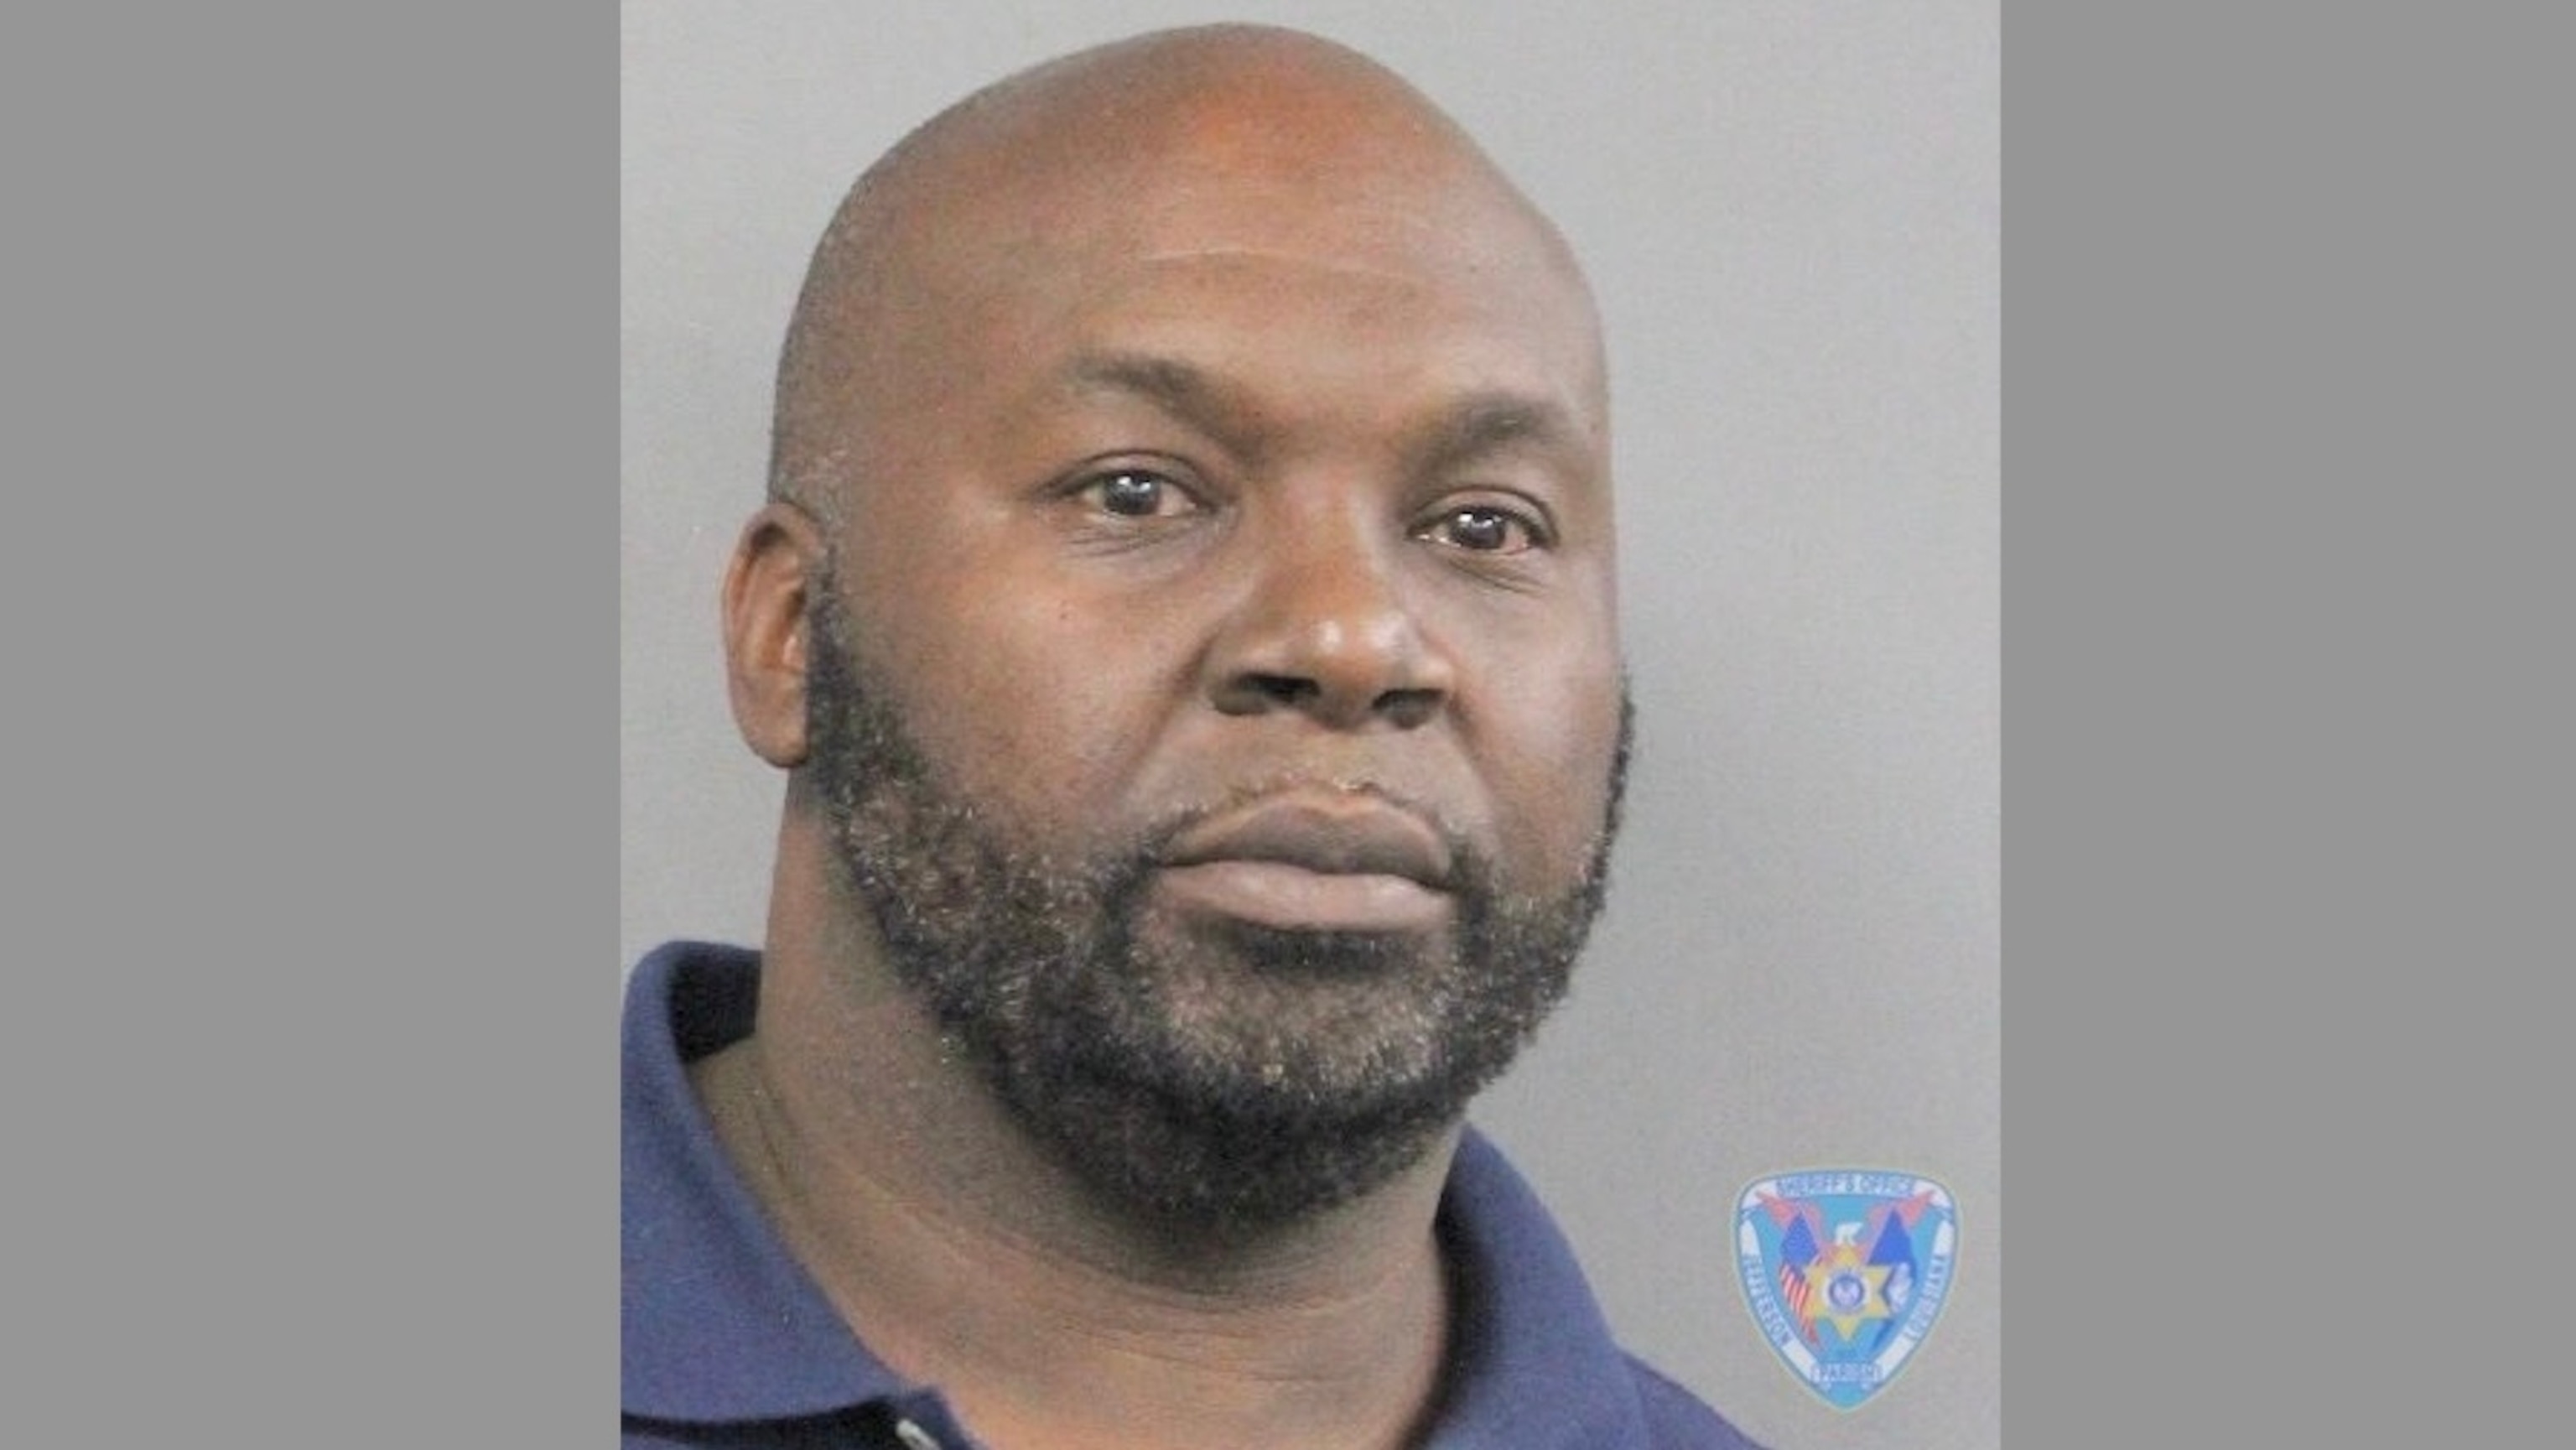 PHOTO: Inmate Leon Ruffin in a mugshot from the Jefferson Parish Sheriff's Office